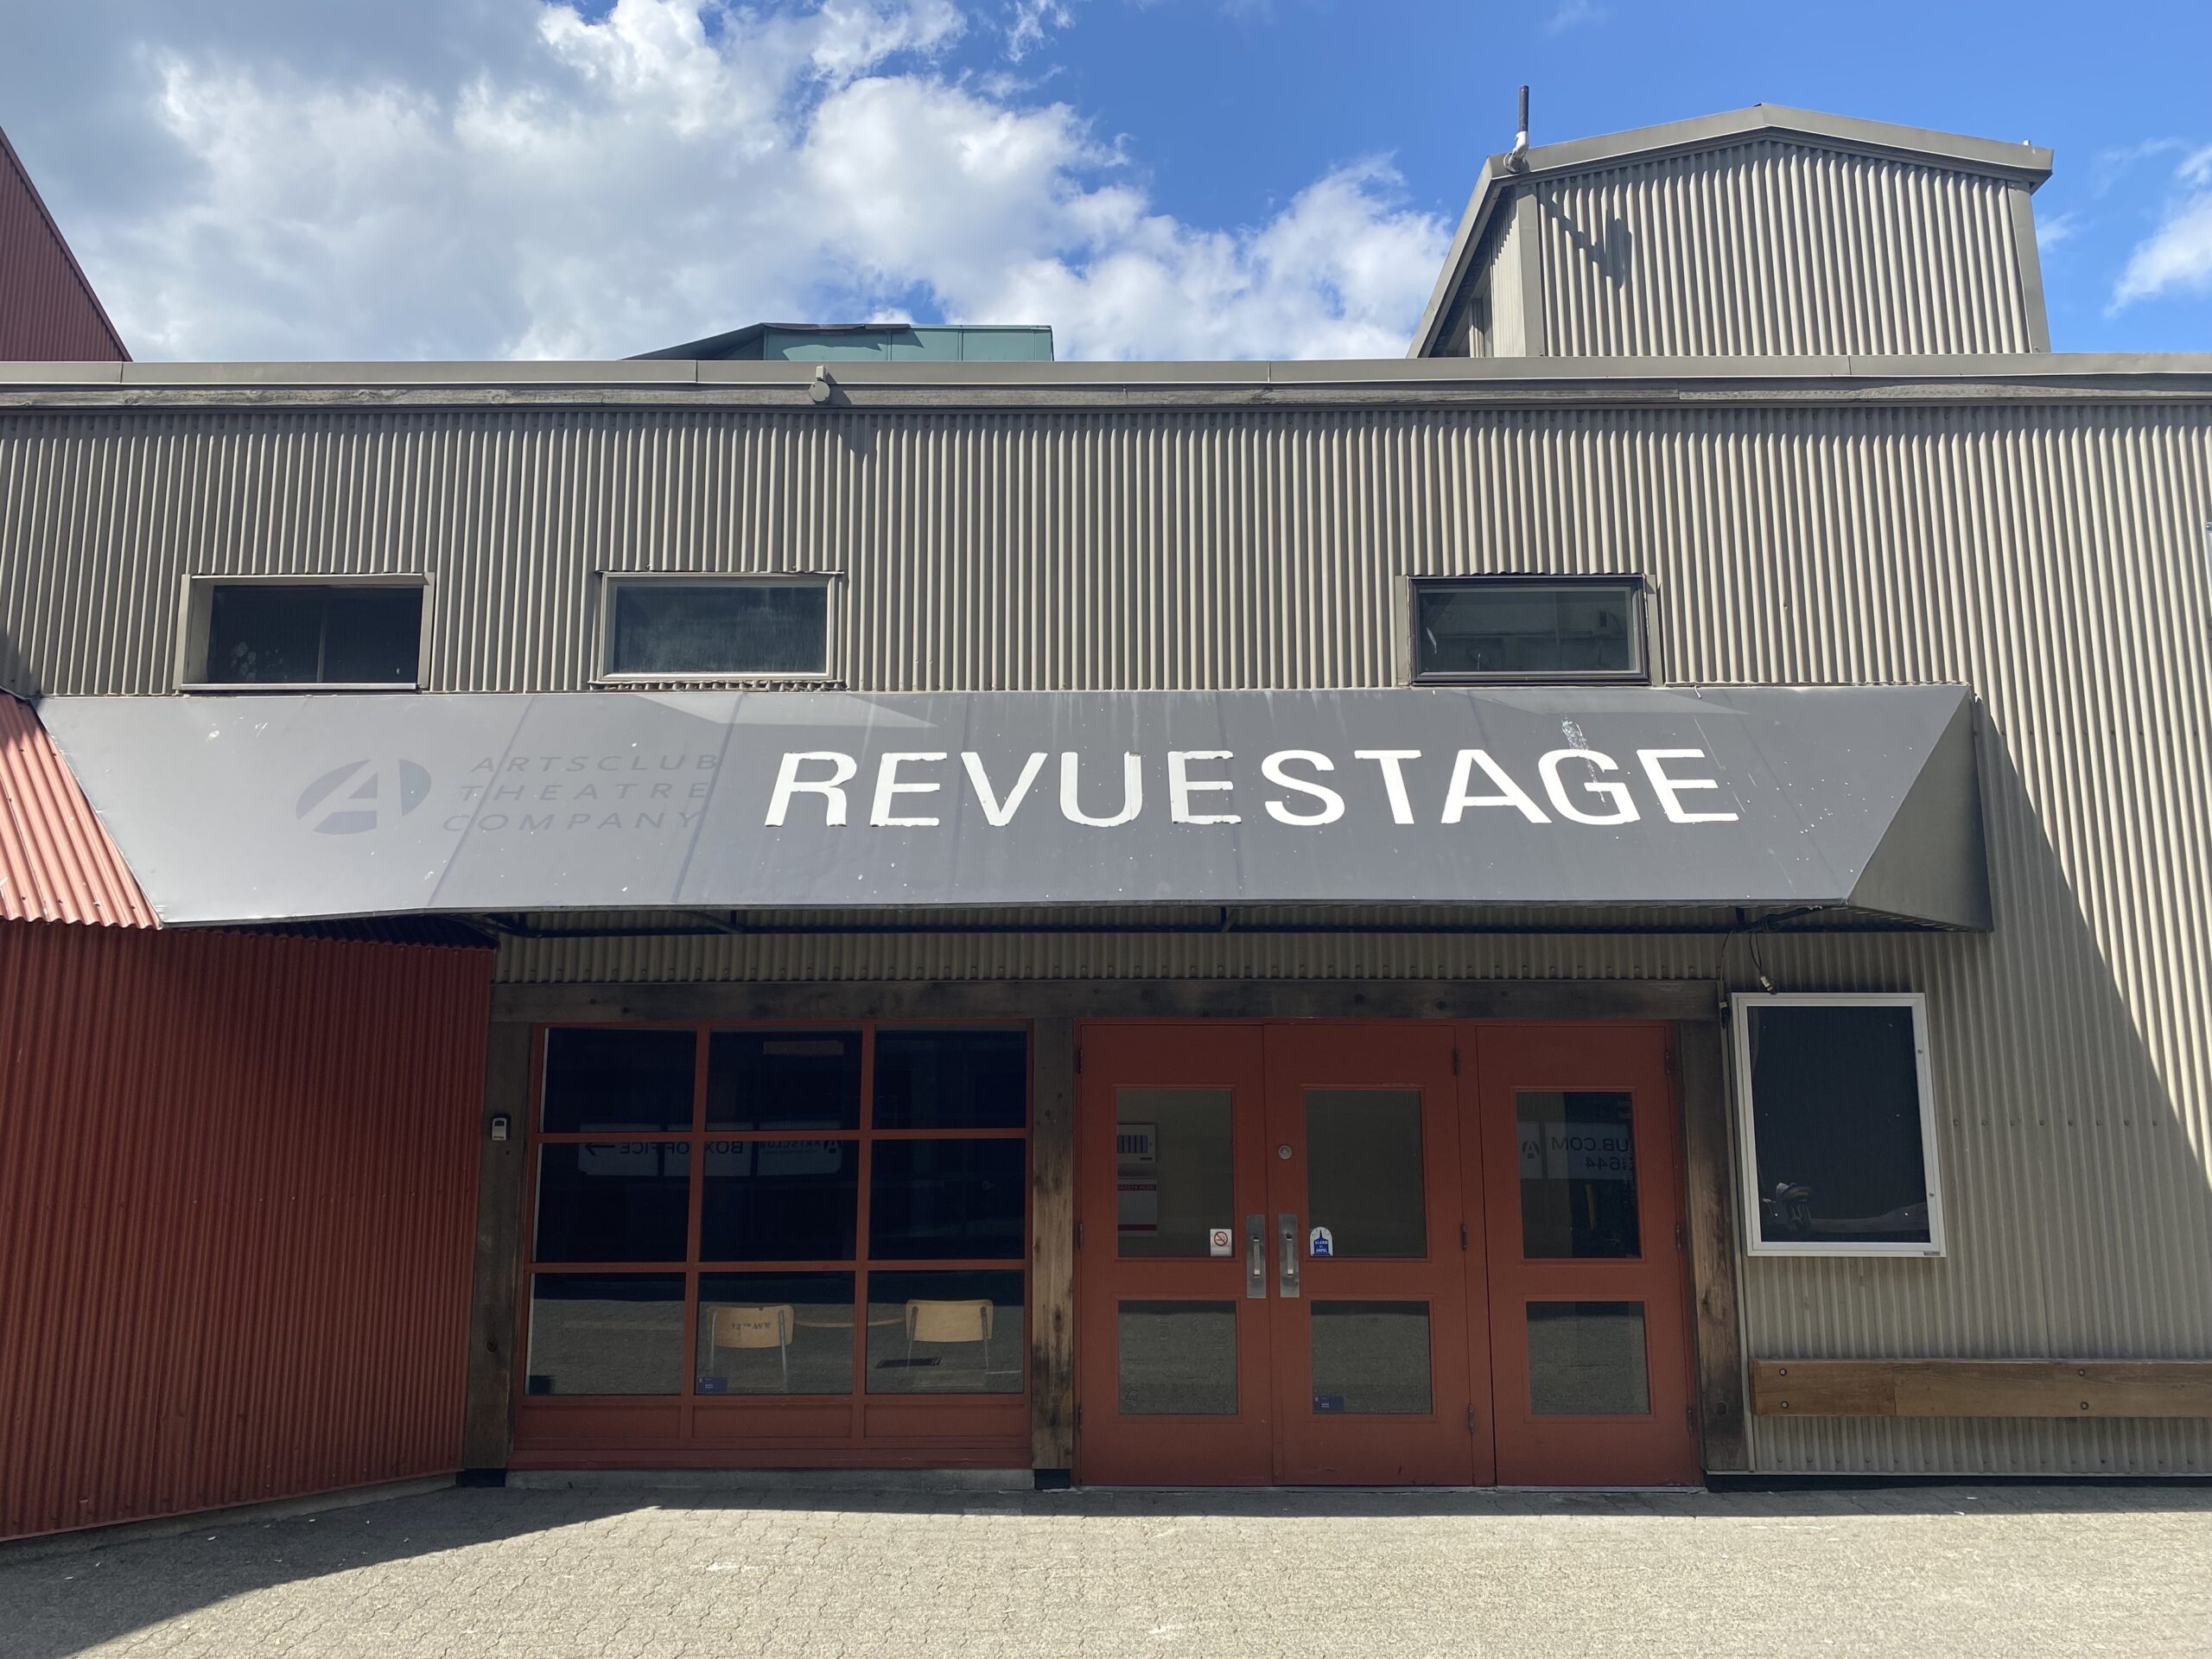 The exterior, front view of Revue Stage.